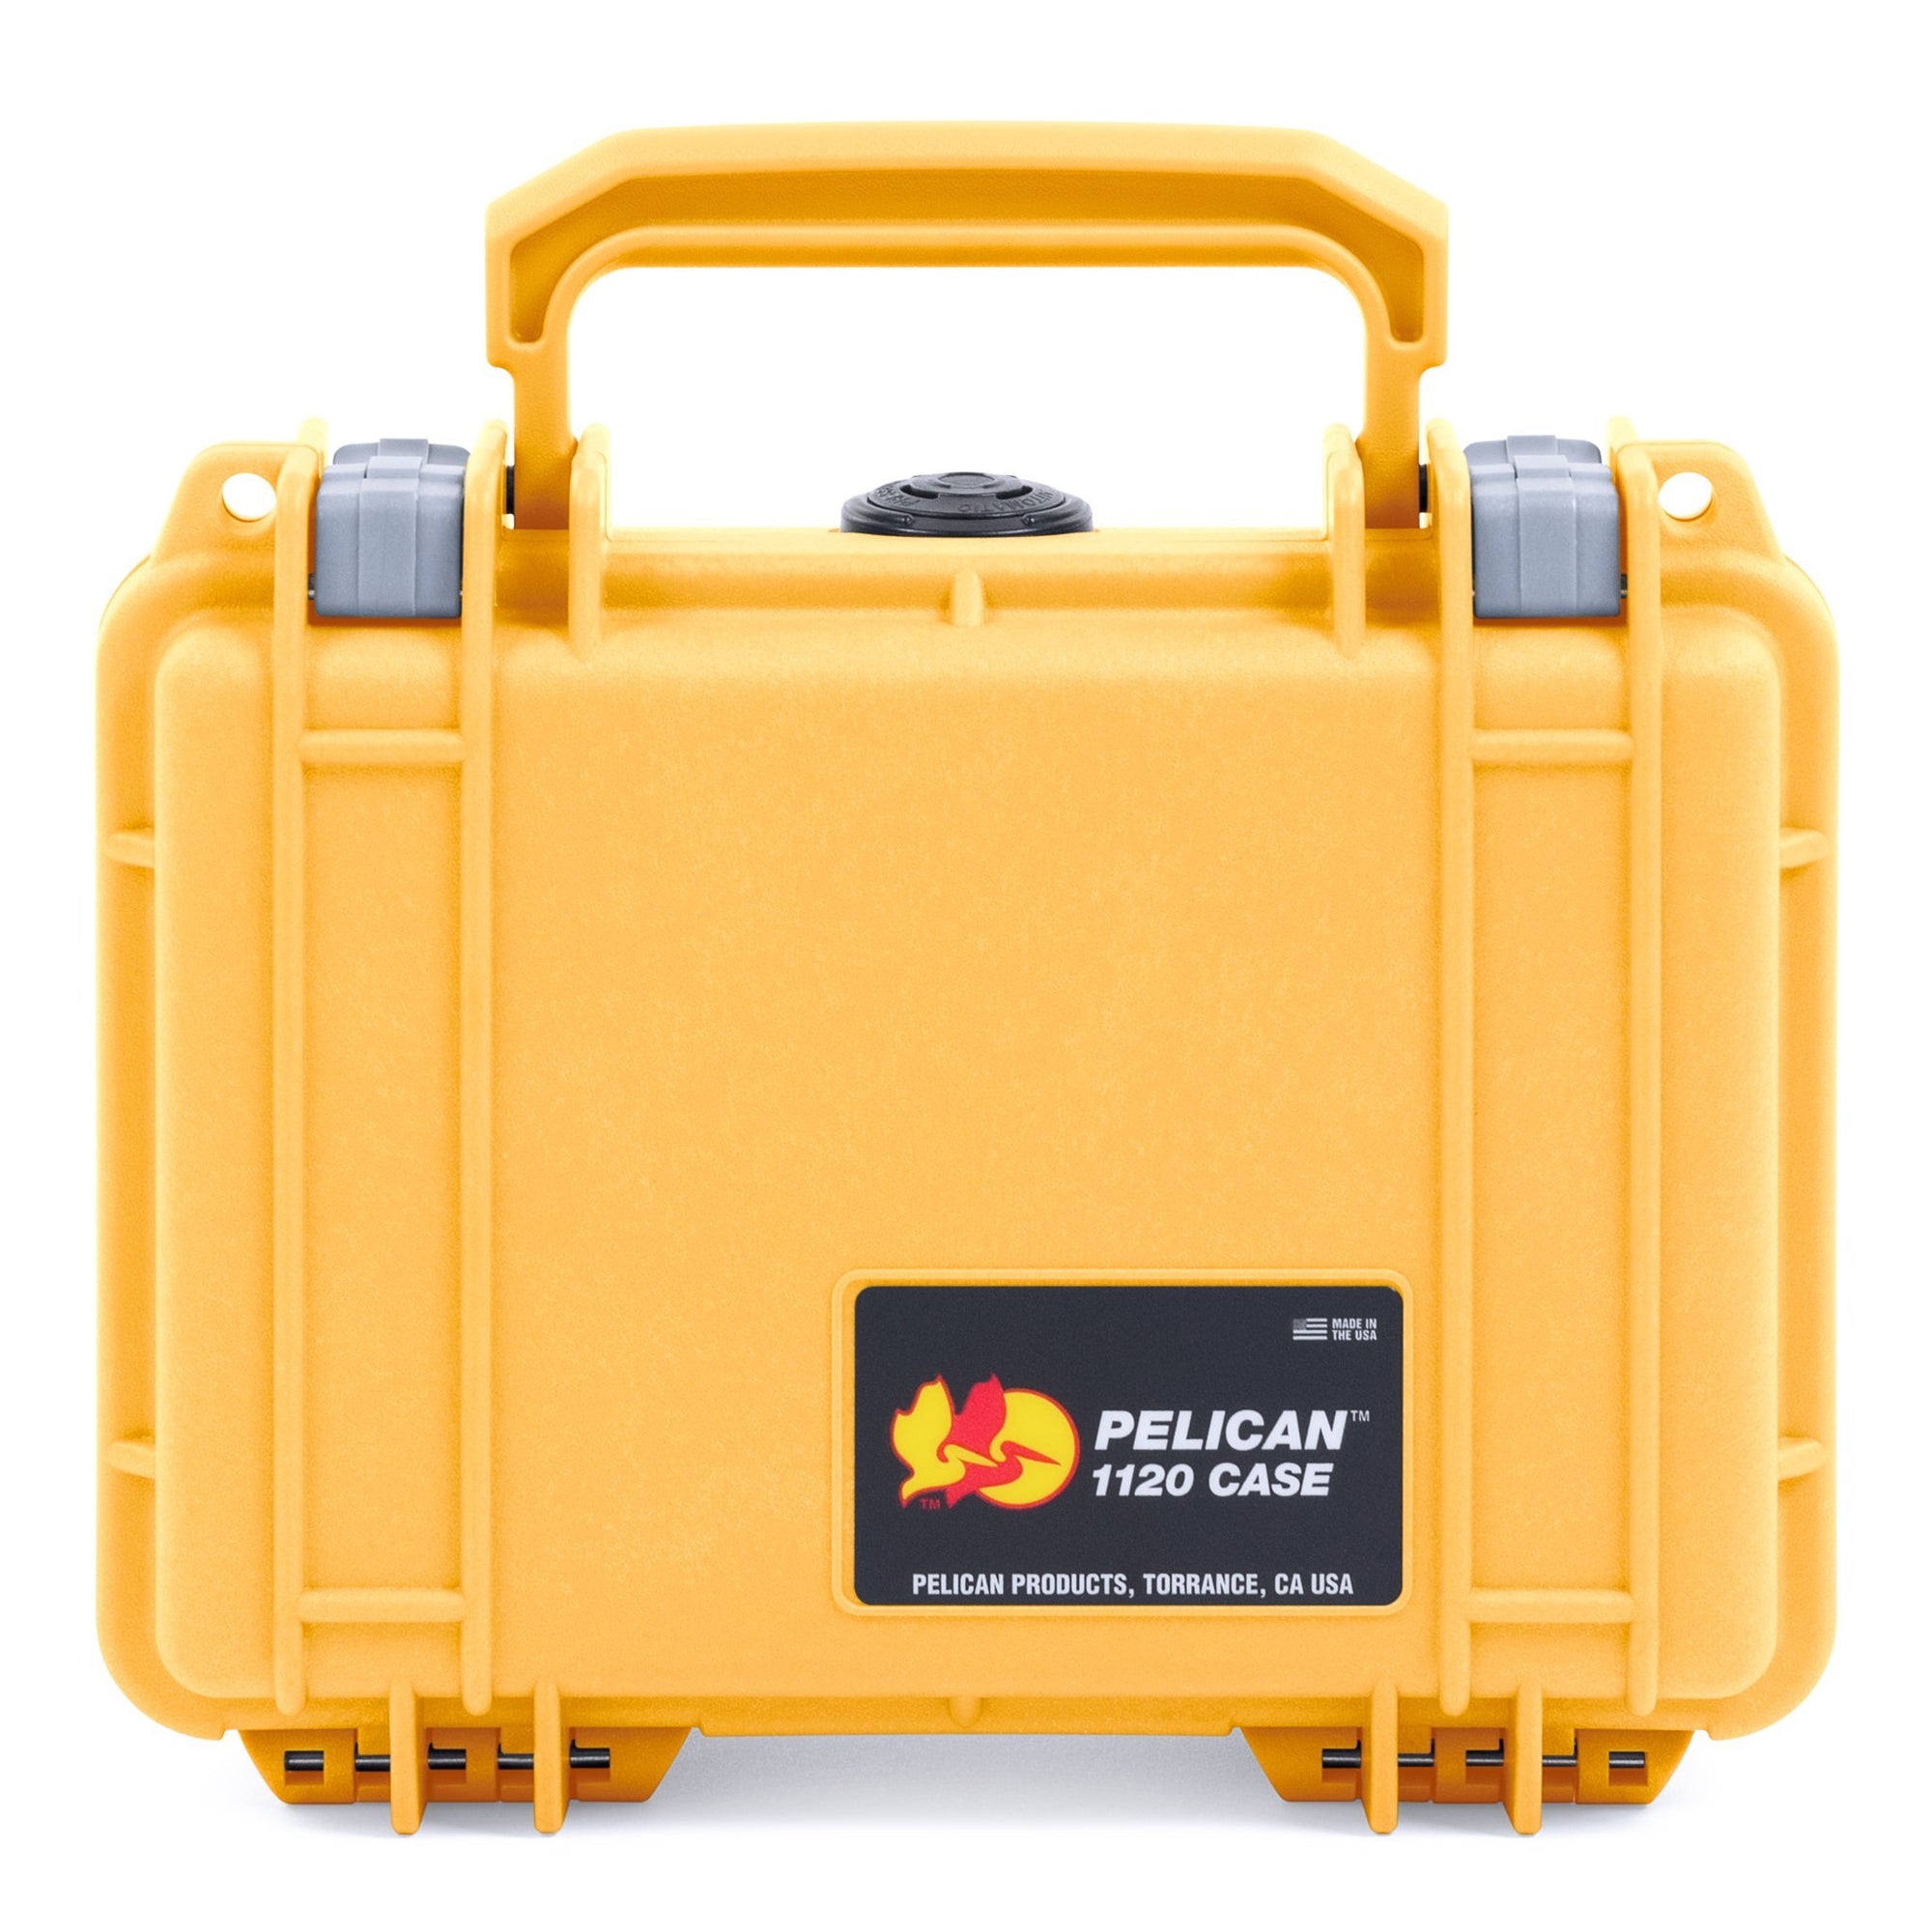 Pelican 1120 Case, Yellow with Silver Latches ColorCase 